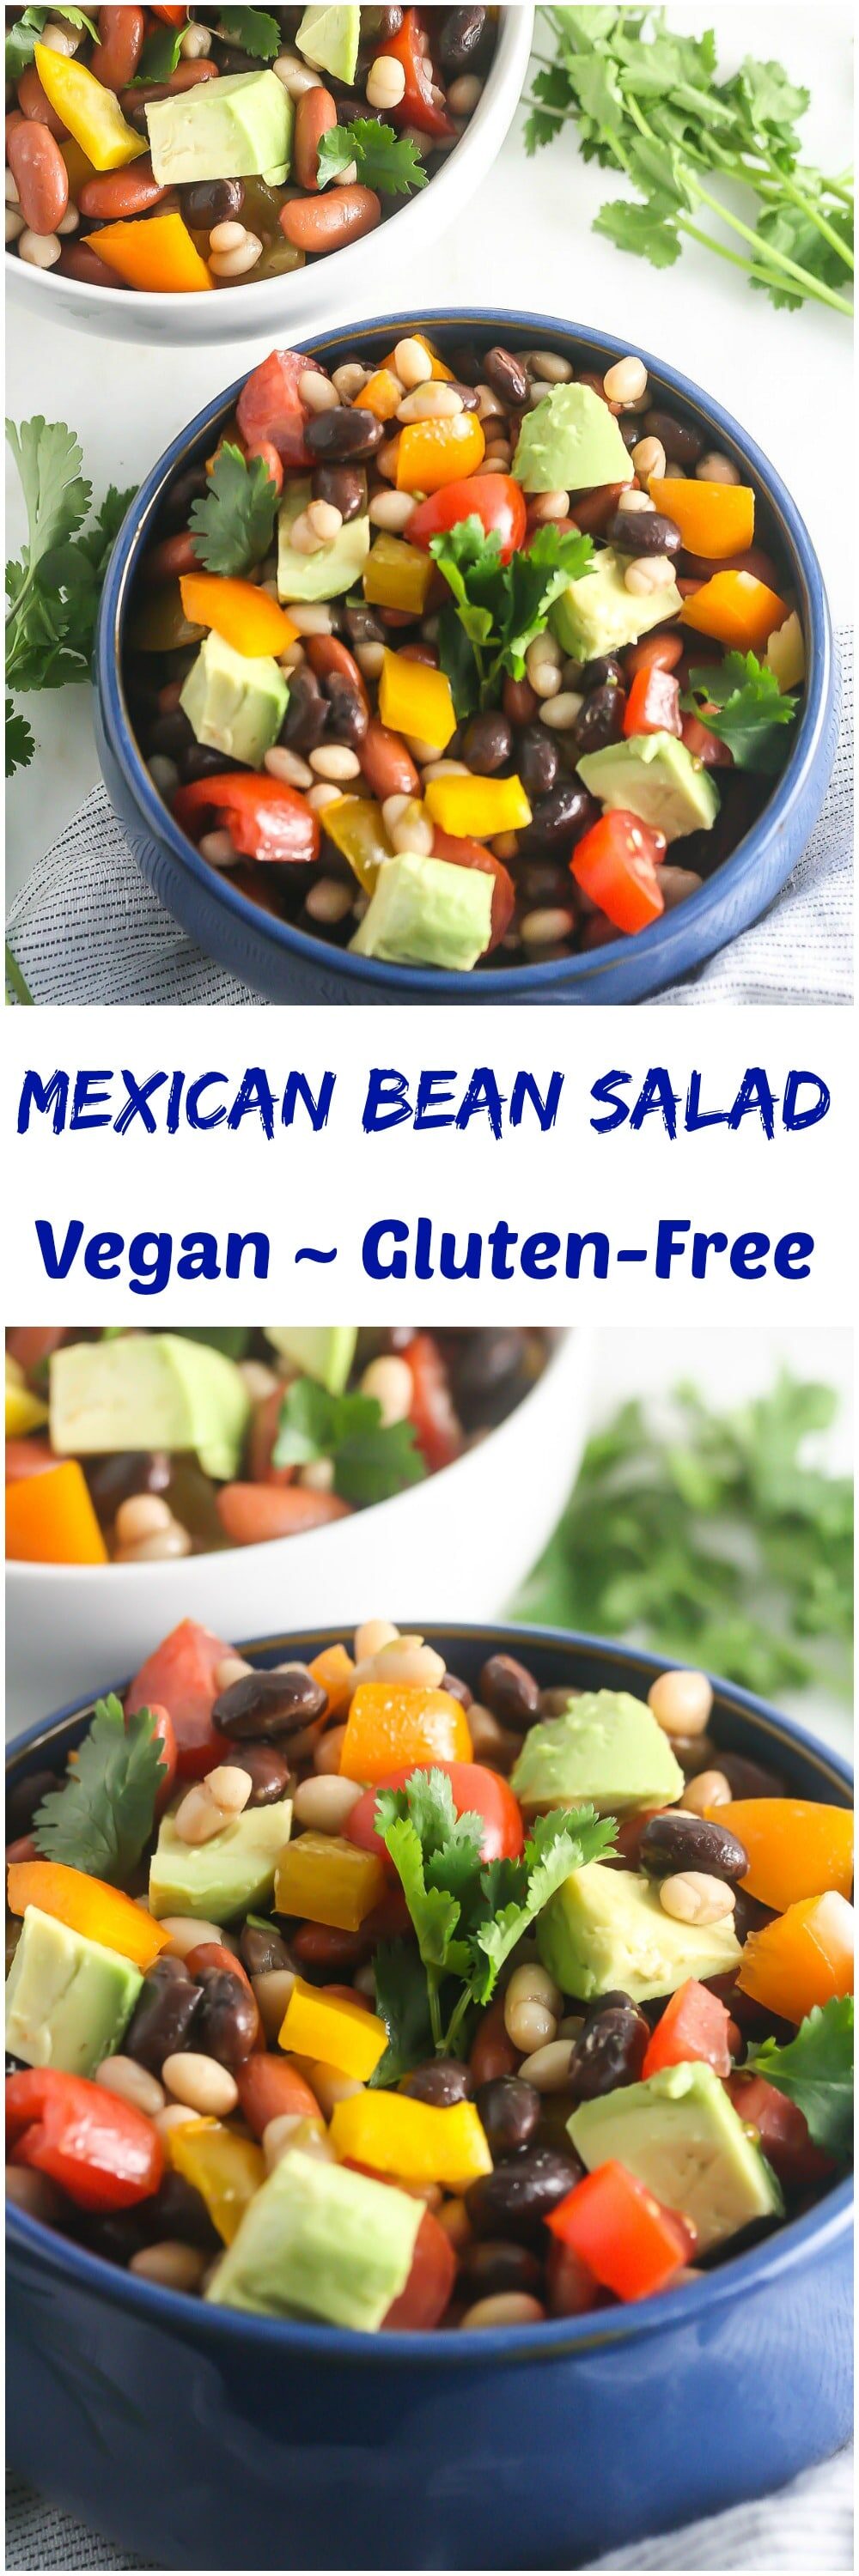 This Mexican Bean Salad is packed with plant-based protein and fiber and is naturally gluten and grain-free! www.laurenkellynutrition.com